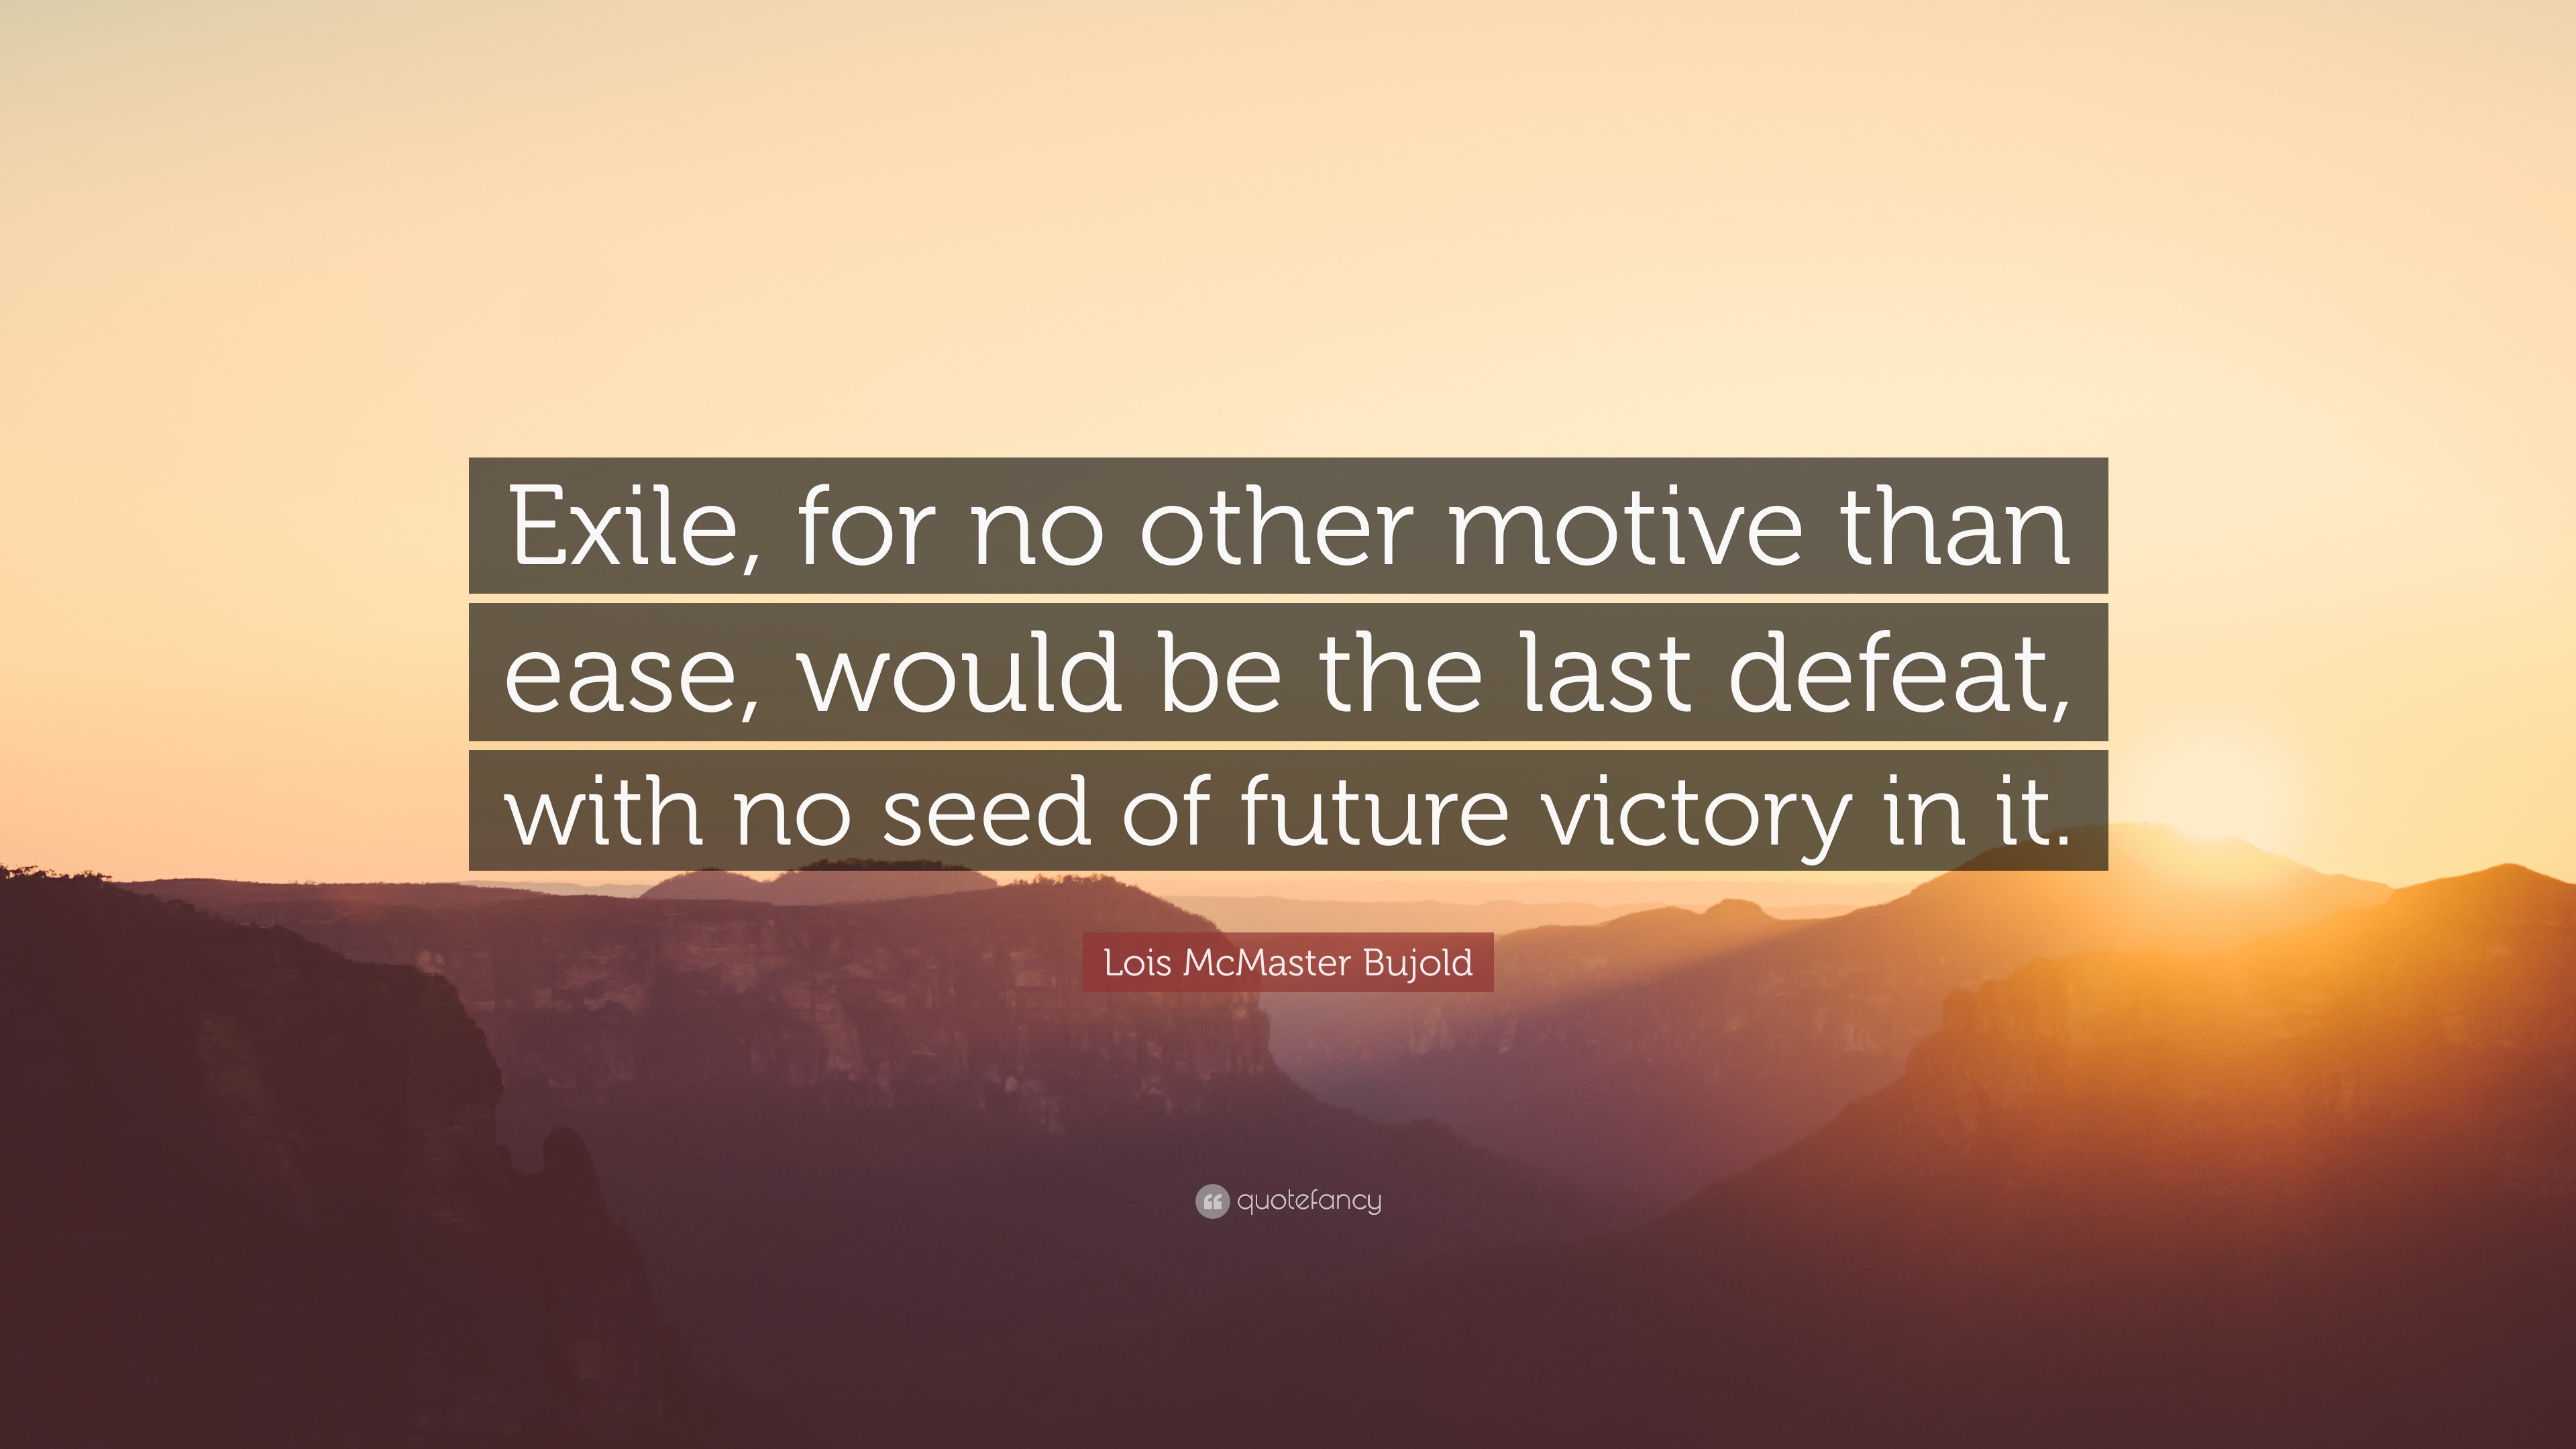 Lois Mcmaster Bujold Quote Exile For No Other Motive Than Ease Would Be The Last Defeat With No Seed Of Future Victory In It 7 Wallpapers Quotefancy